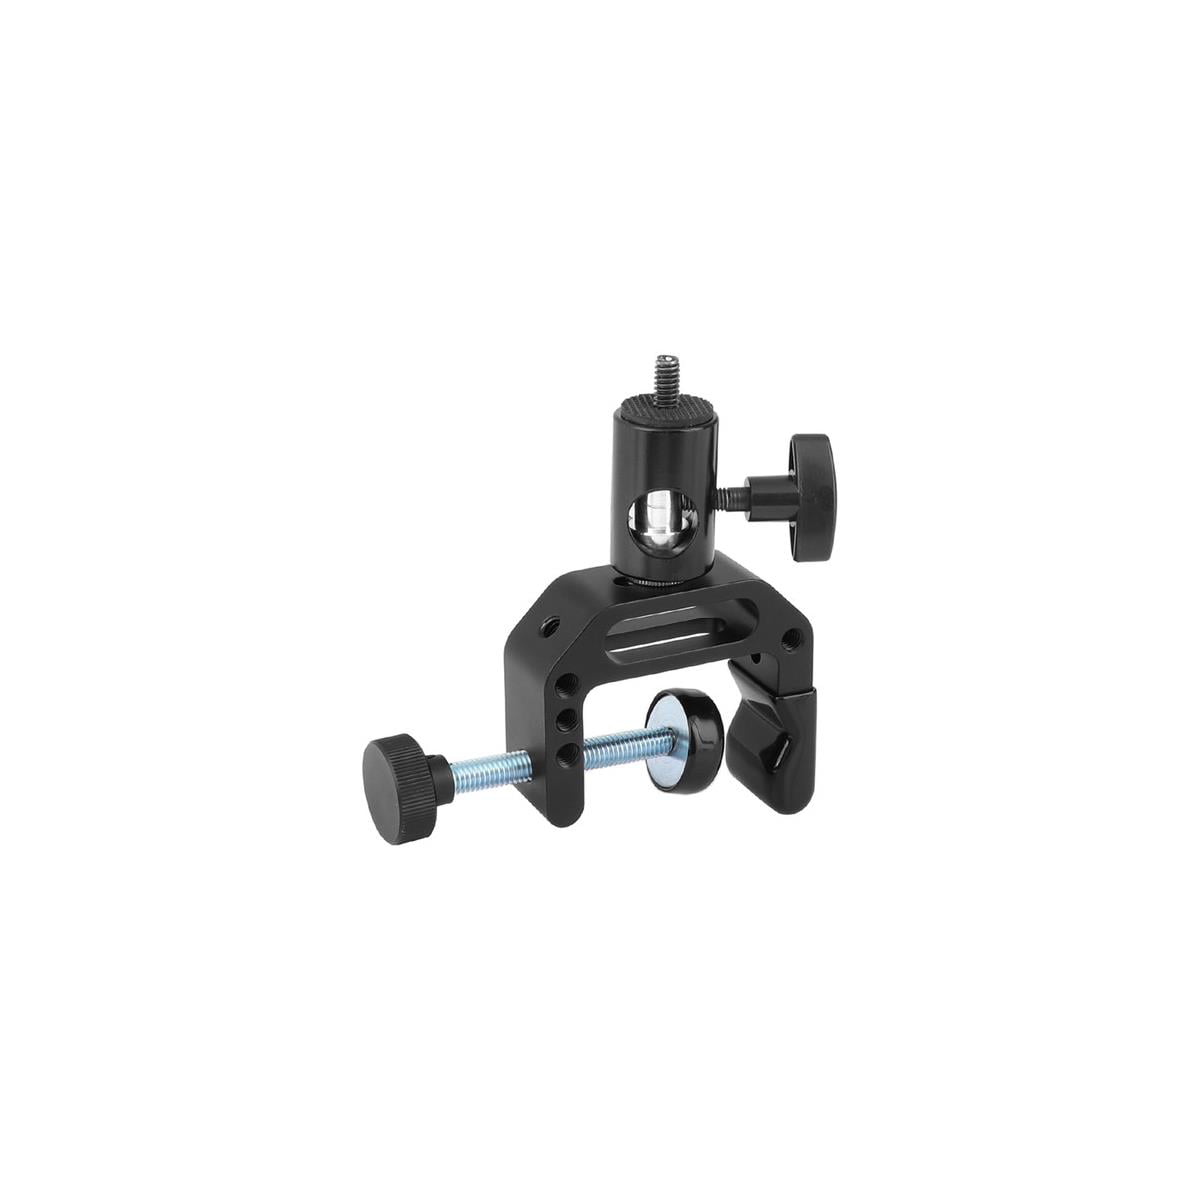 CAMVATE Extended Size C Clamp with 1/4 & 3/8 Mounting Points For Photographic Accessories 